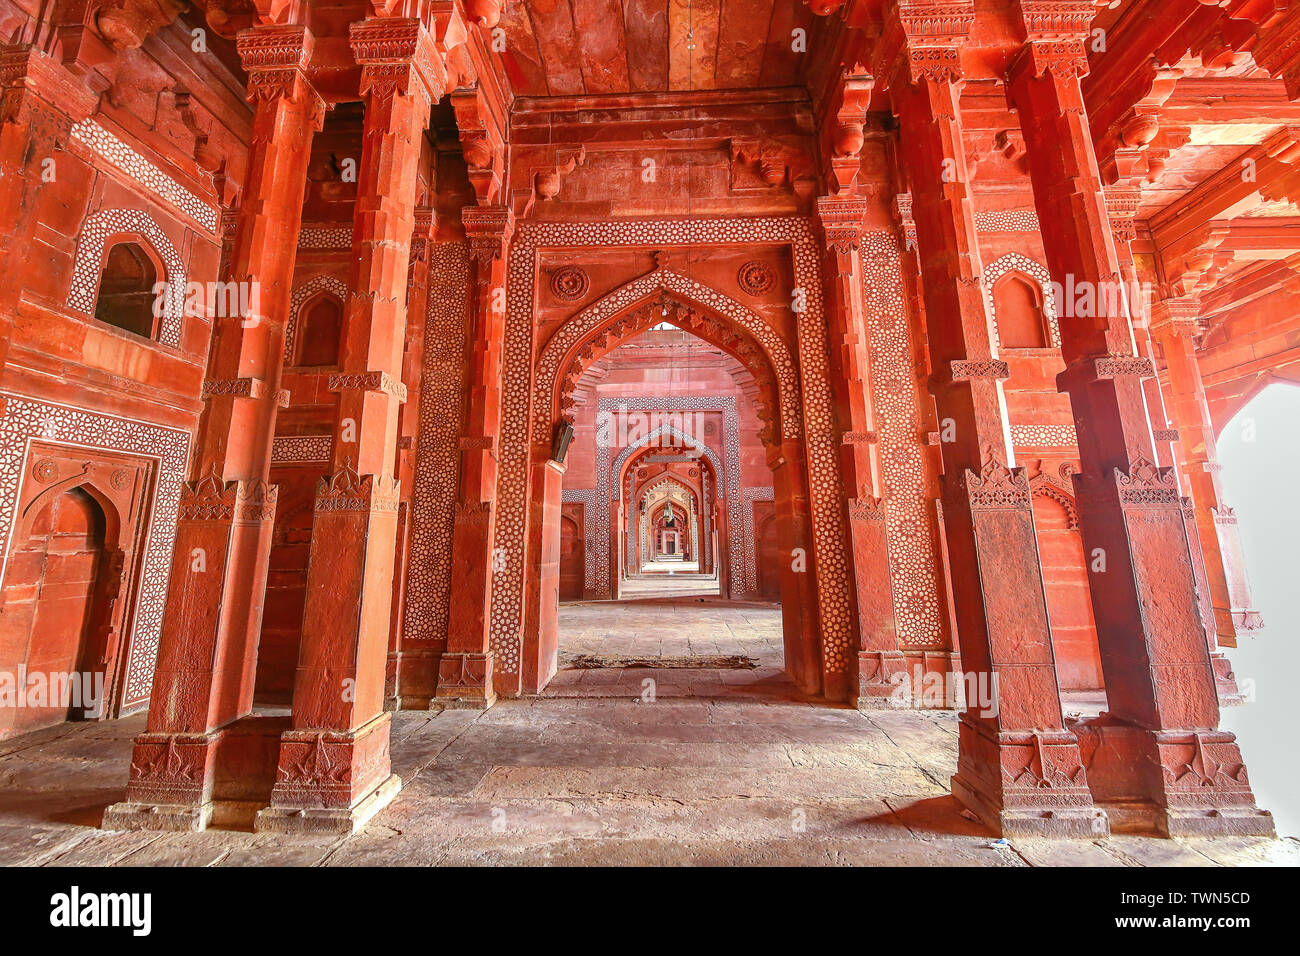 Fatehpur Sikri medieval red sandstone mughal architecture. Fatehpur Sikri is an ancient fort city at Agra India built in the sixteenth century Stock Photo